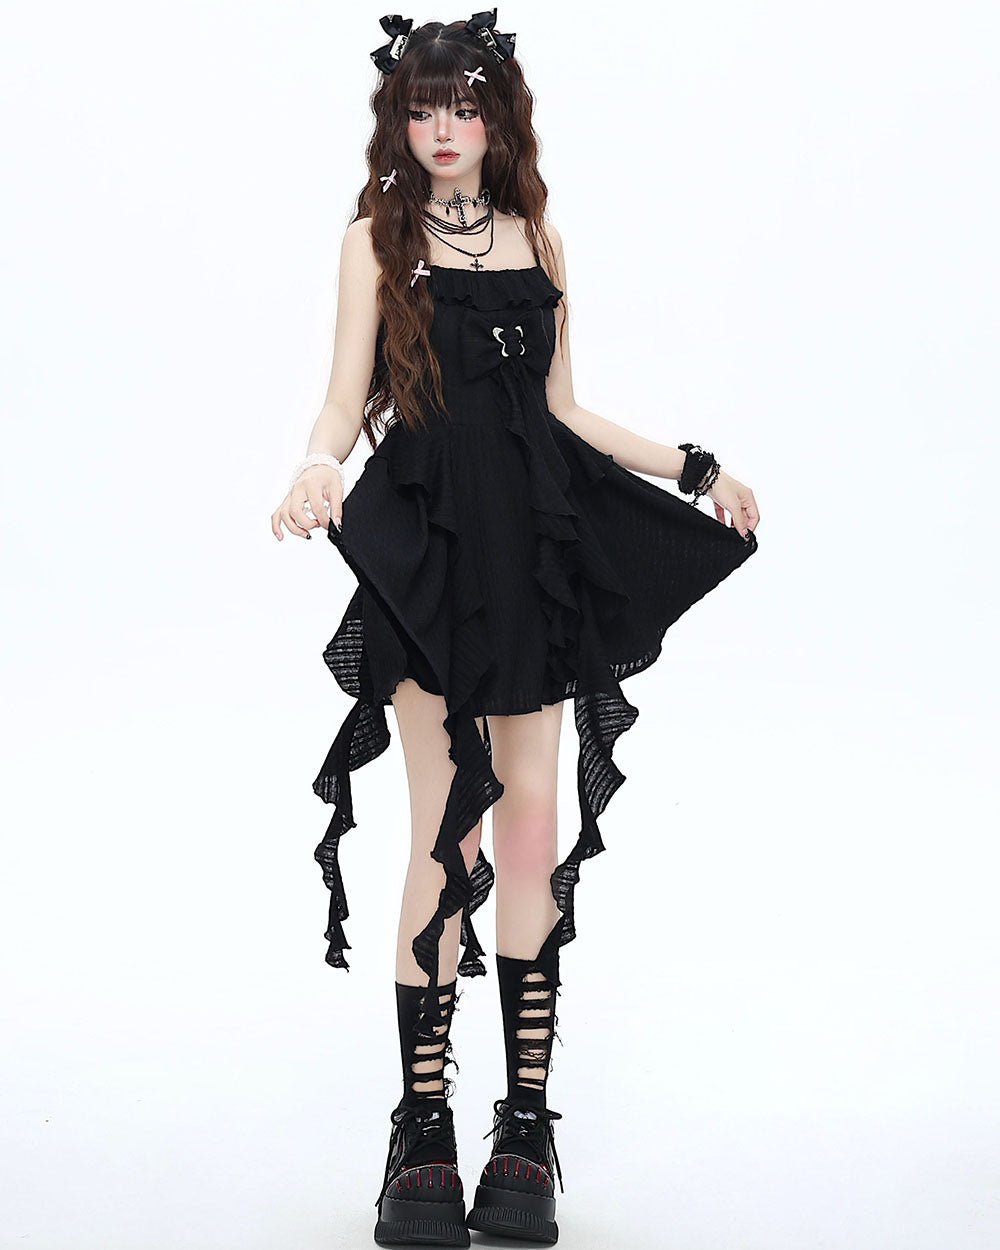 French Design Fairy-style Black Camisole Dress